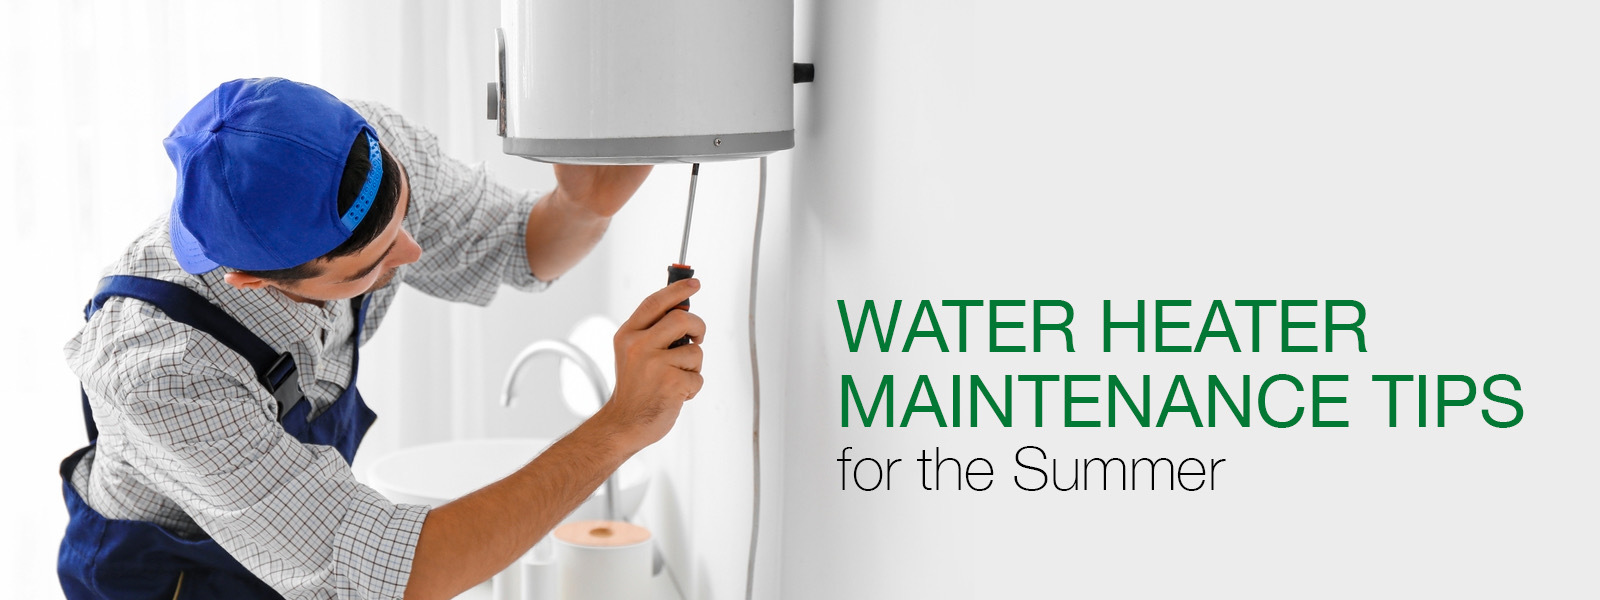 Water Heater Maintenance Tips for the Summer